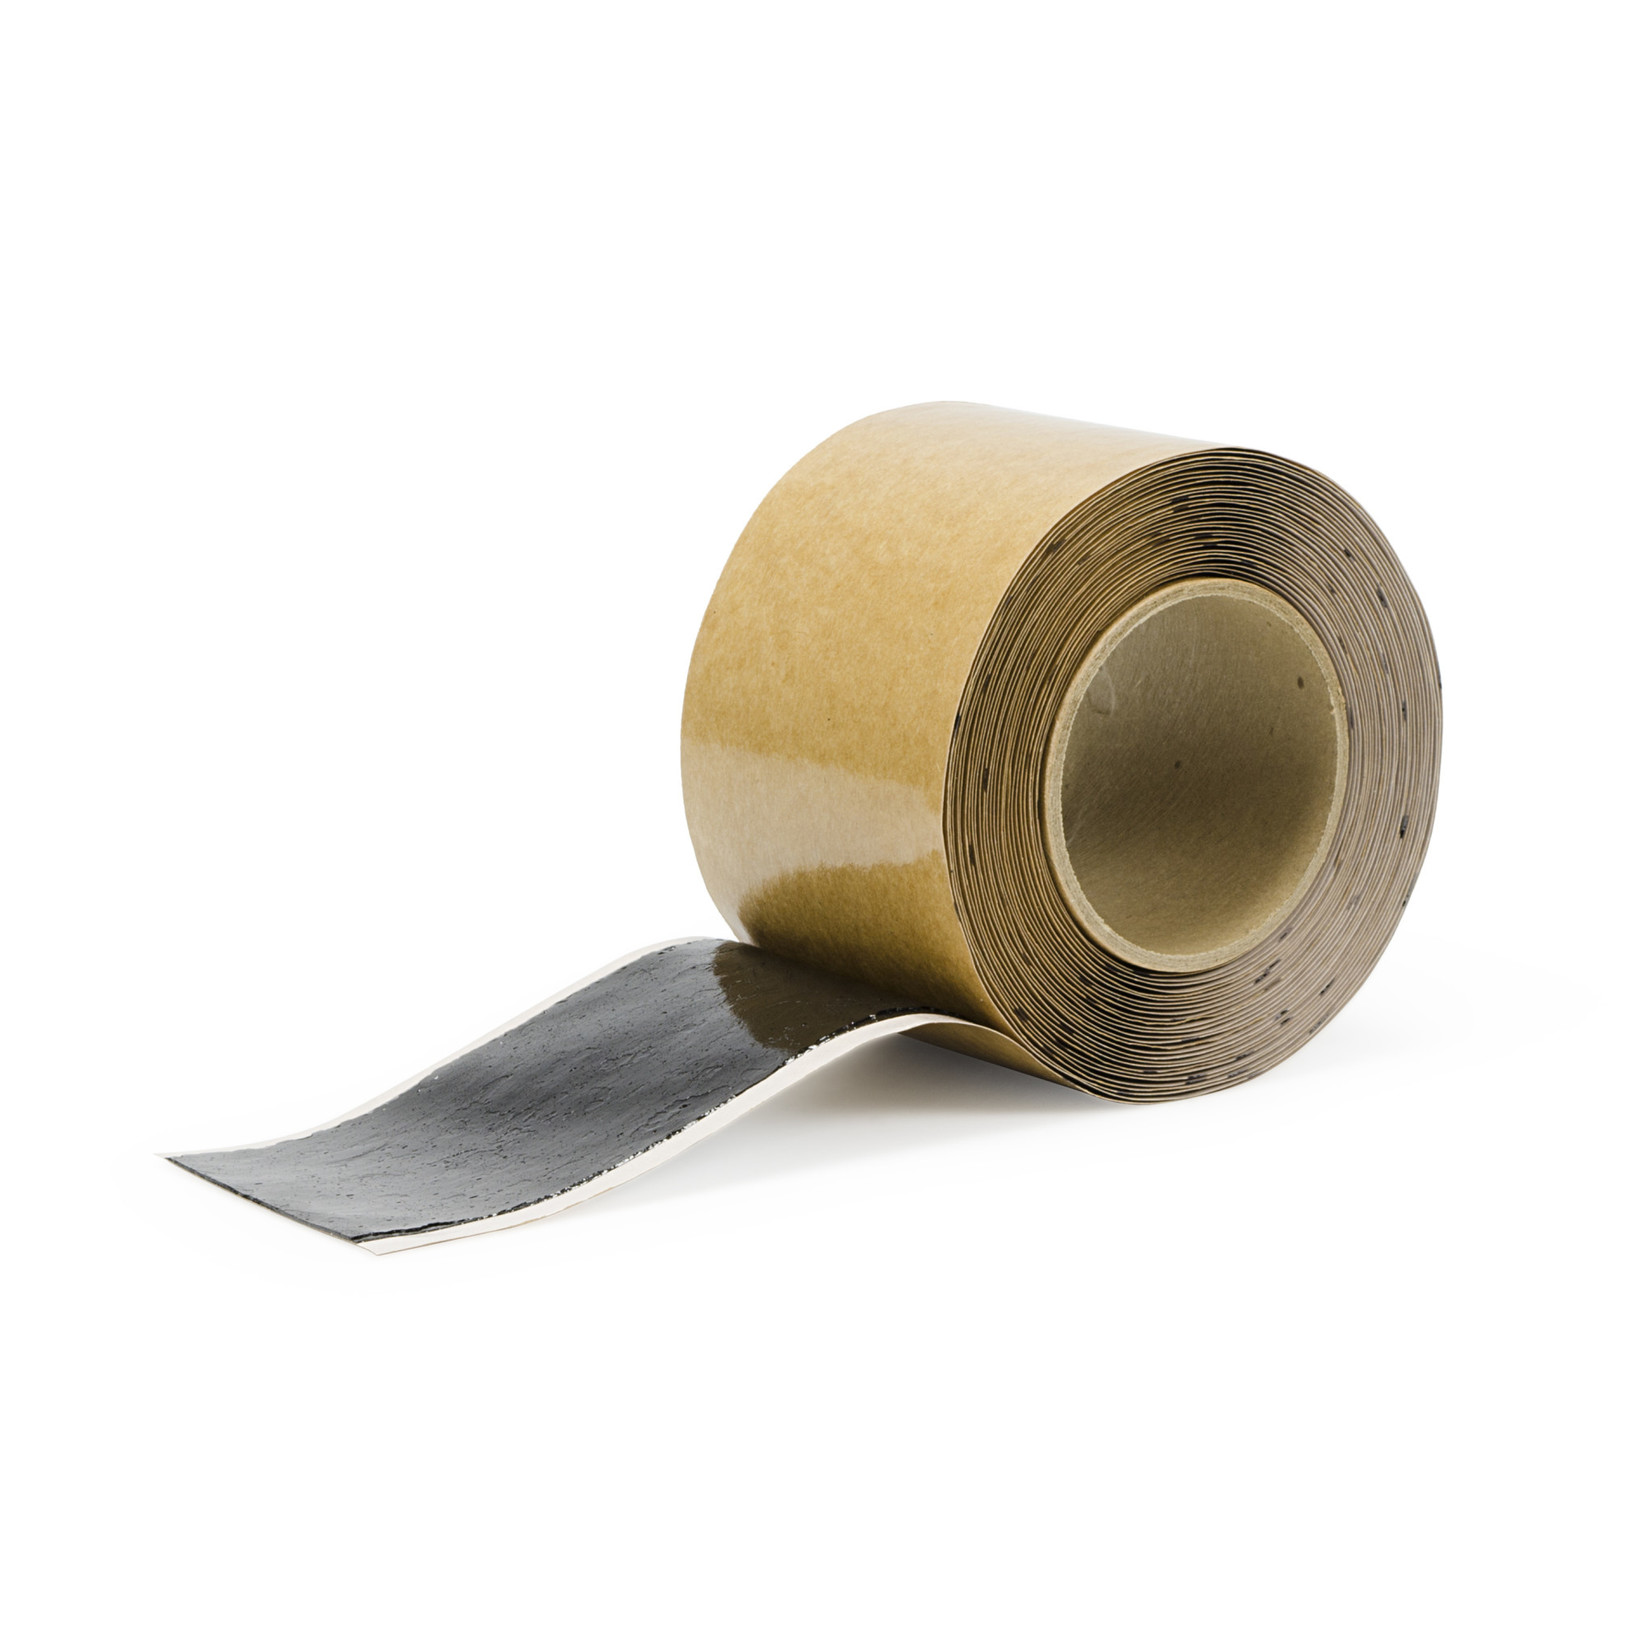 Aquascape Seam Tape - Double Sided - 3" X 25' Roll